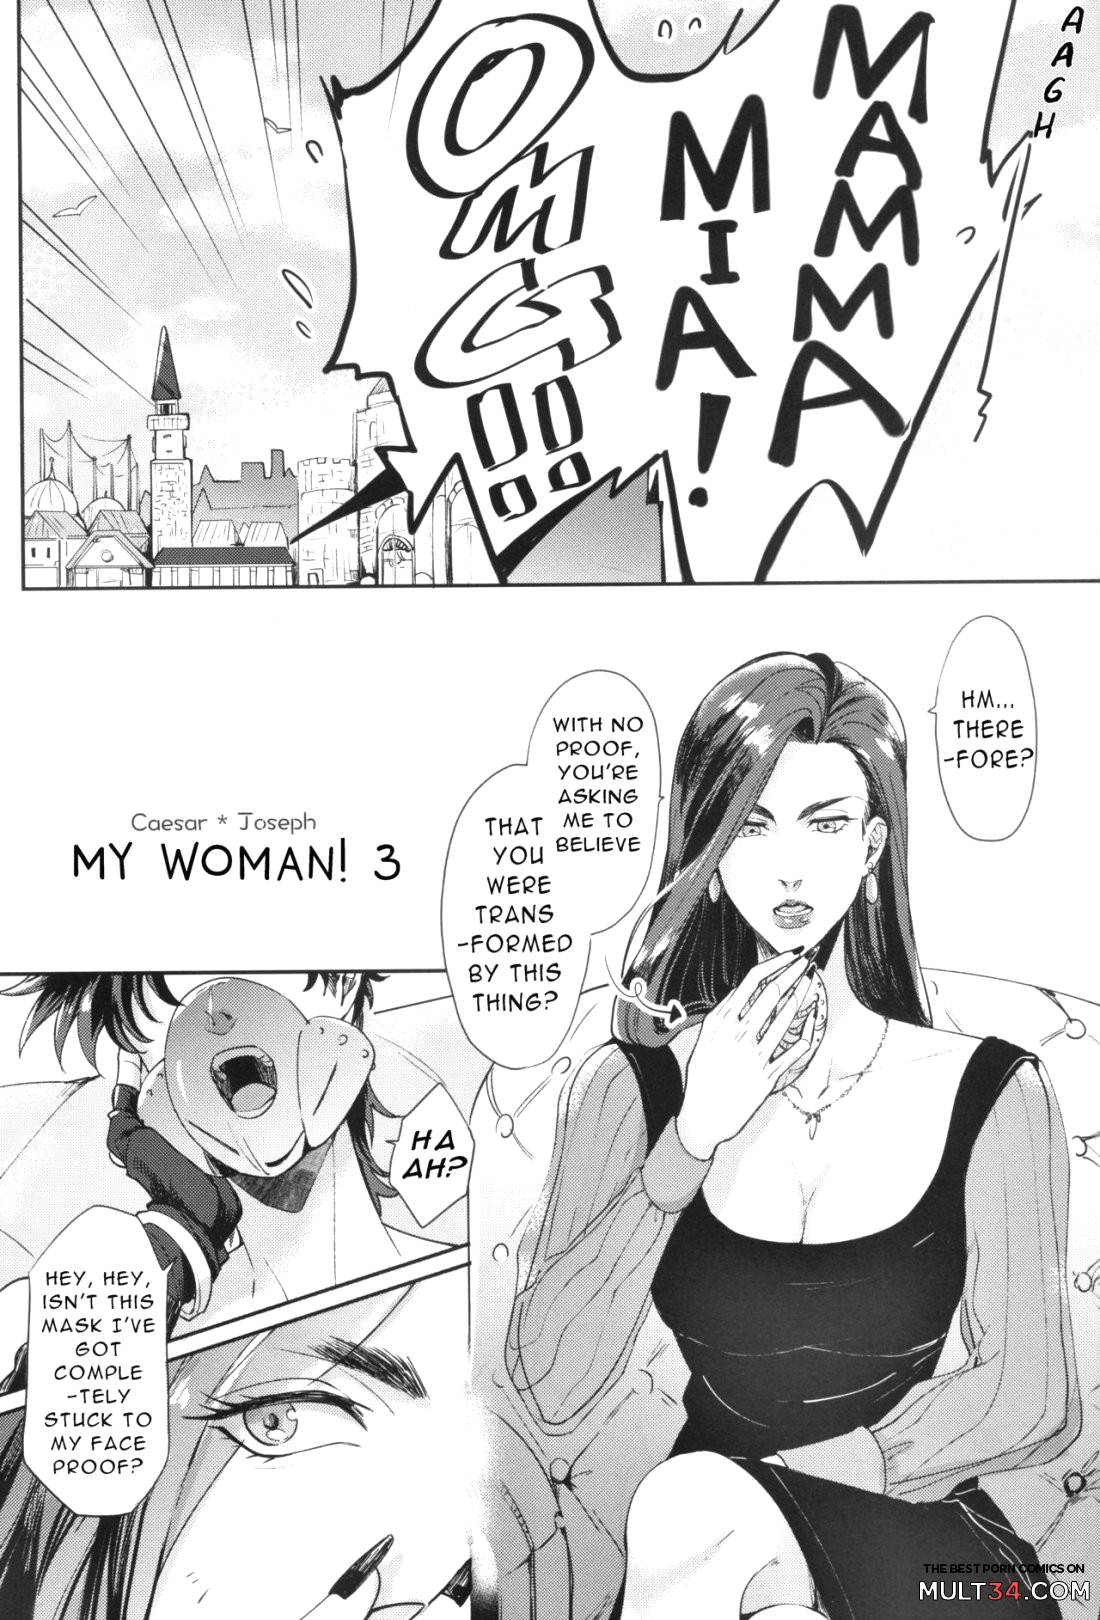 My Woman! page 5